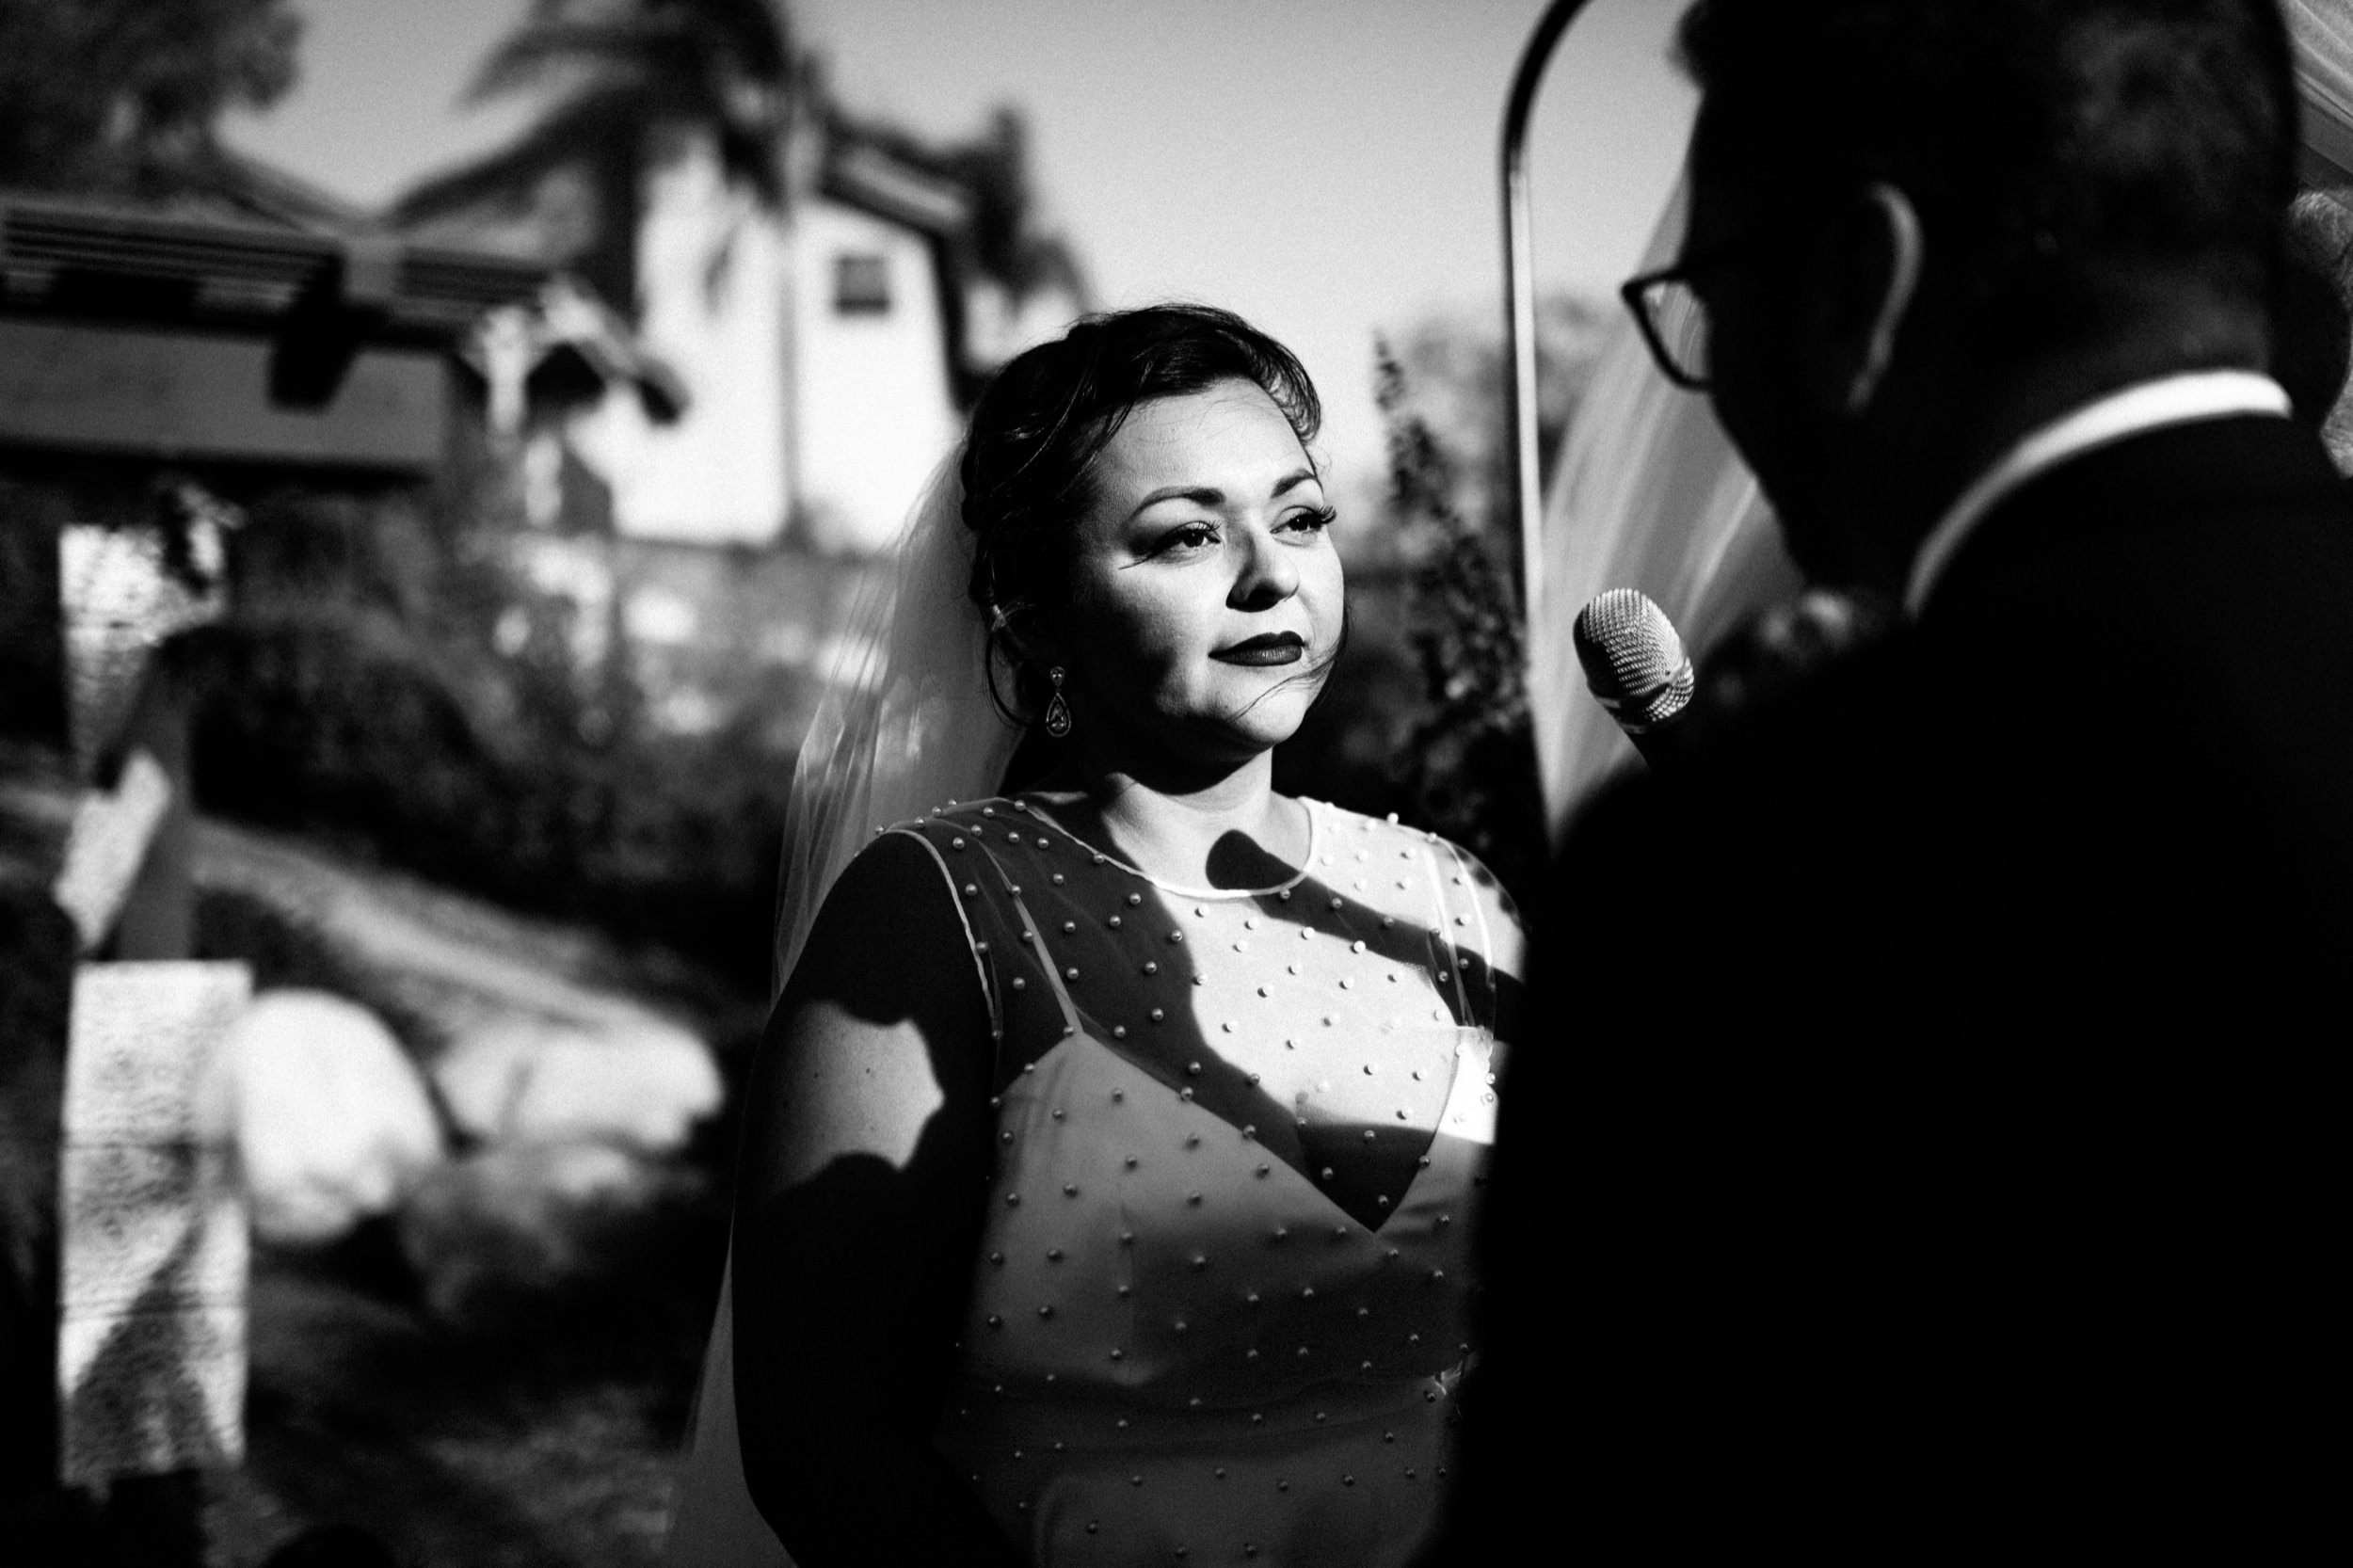 Bride's Reaction During Ceremony - Black and White Documentary Wedding Photography San Diego